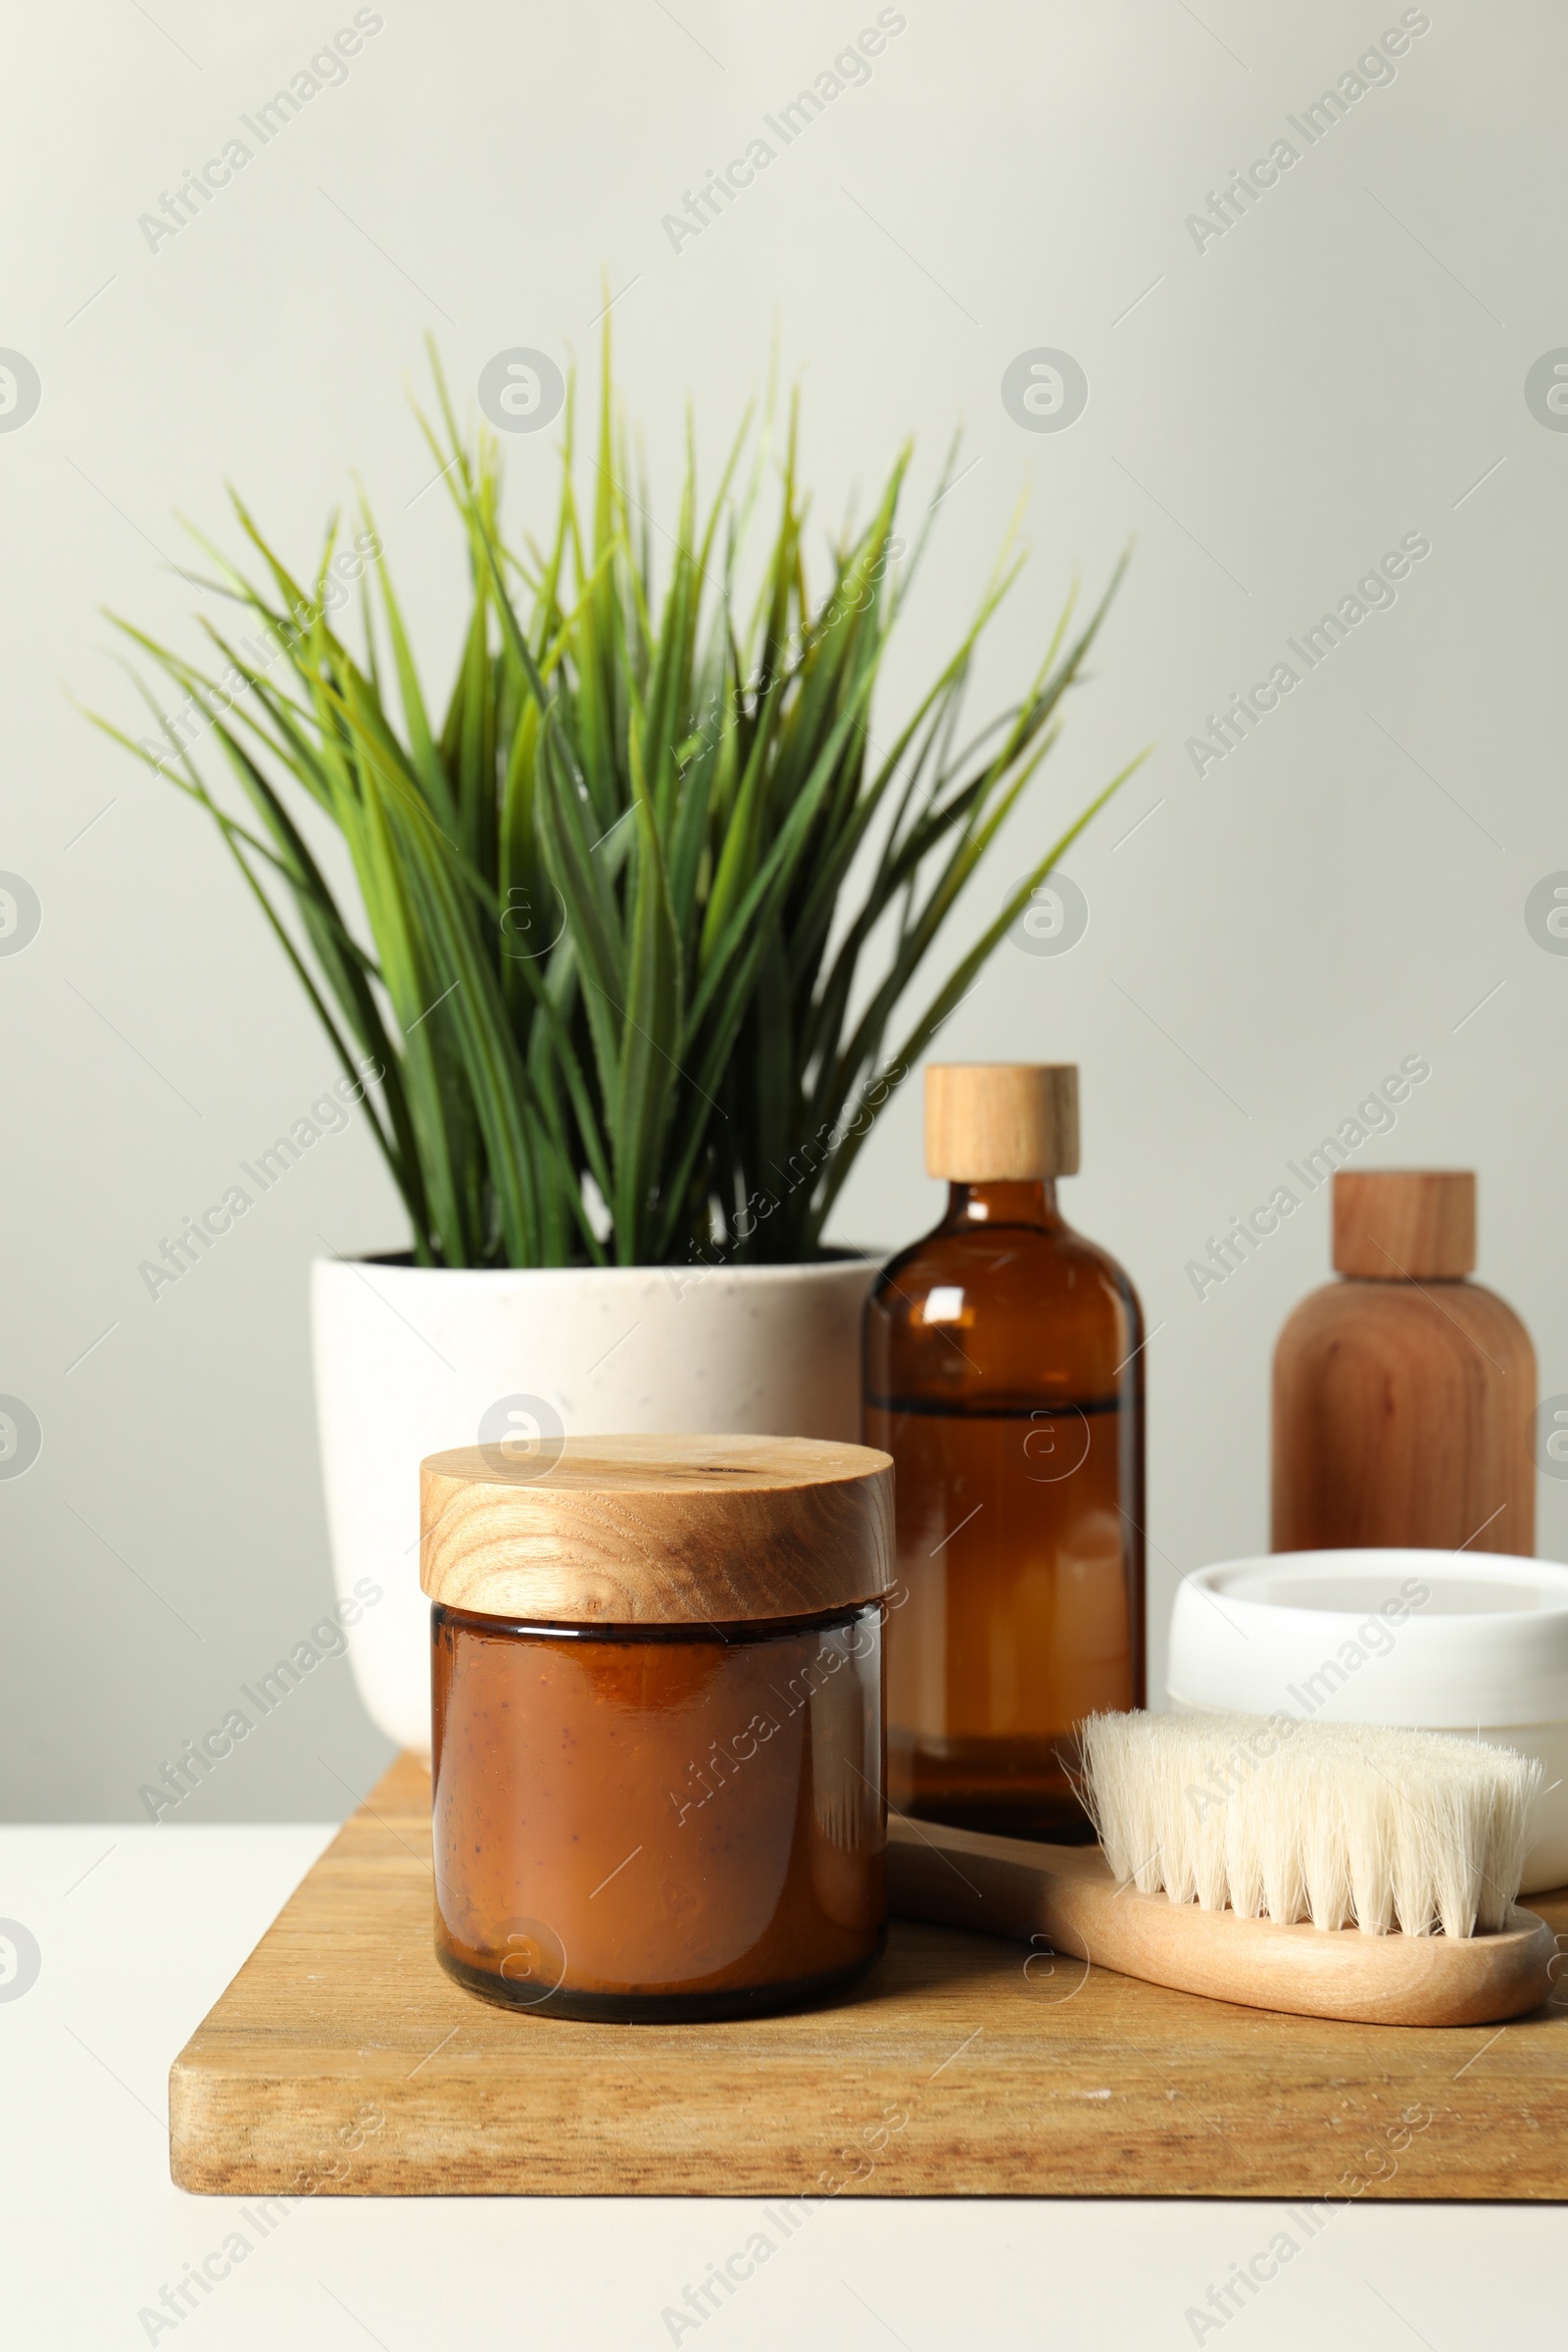 Photo of Different bath accessories and houseplant on white table against grey background